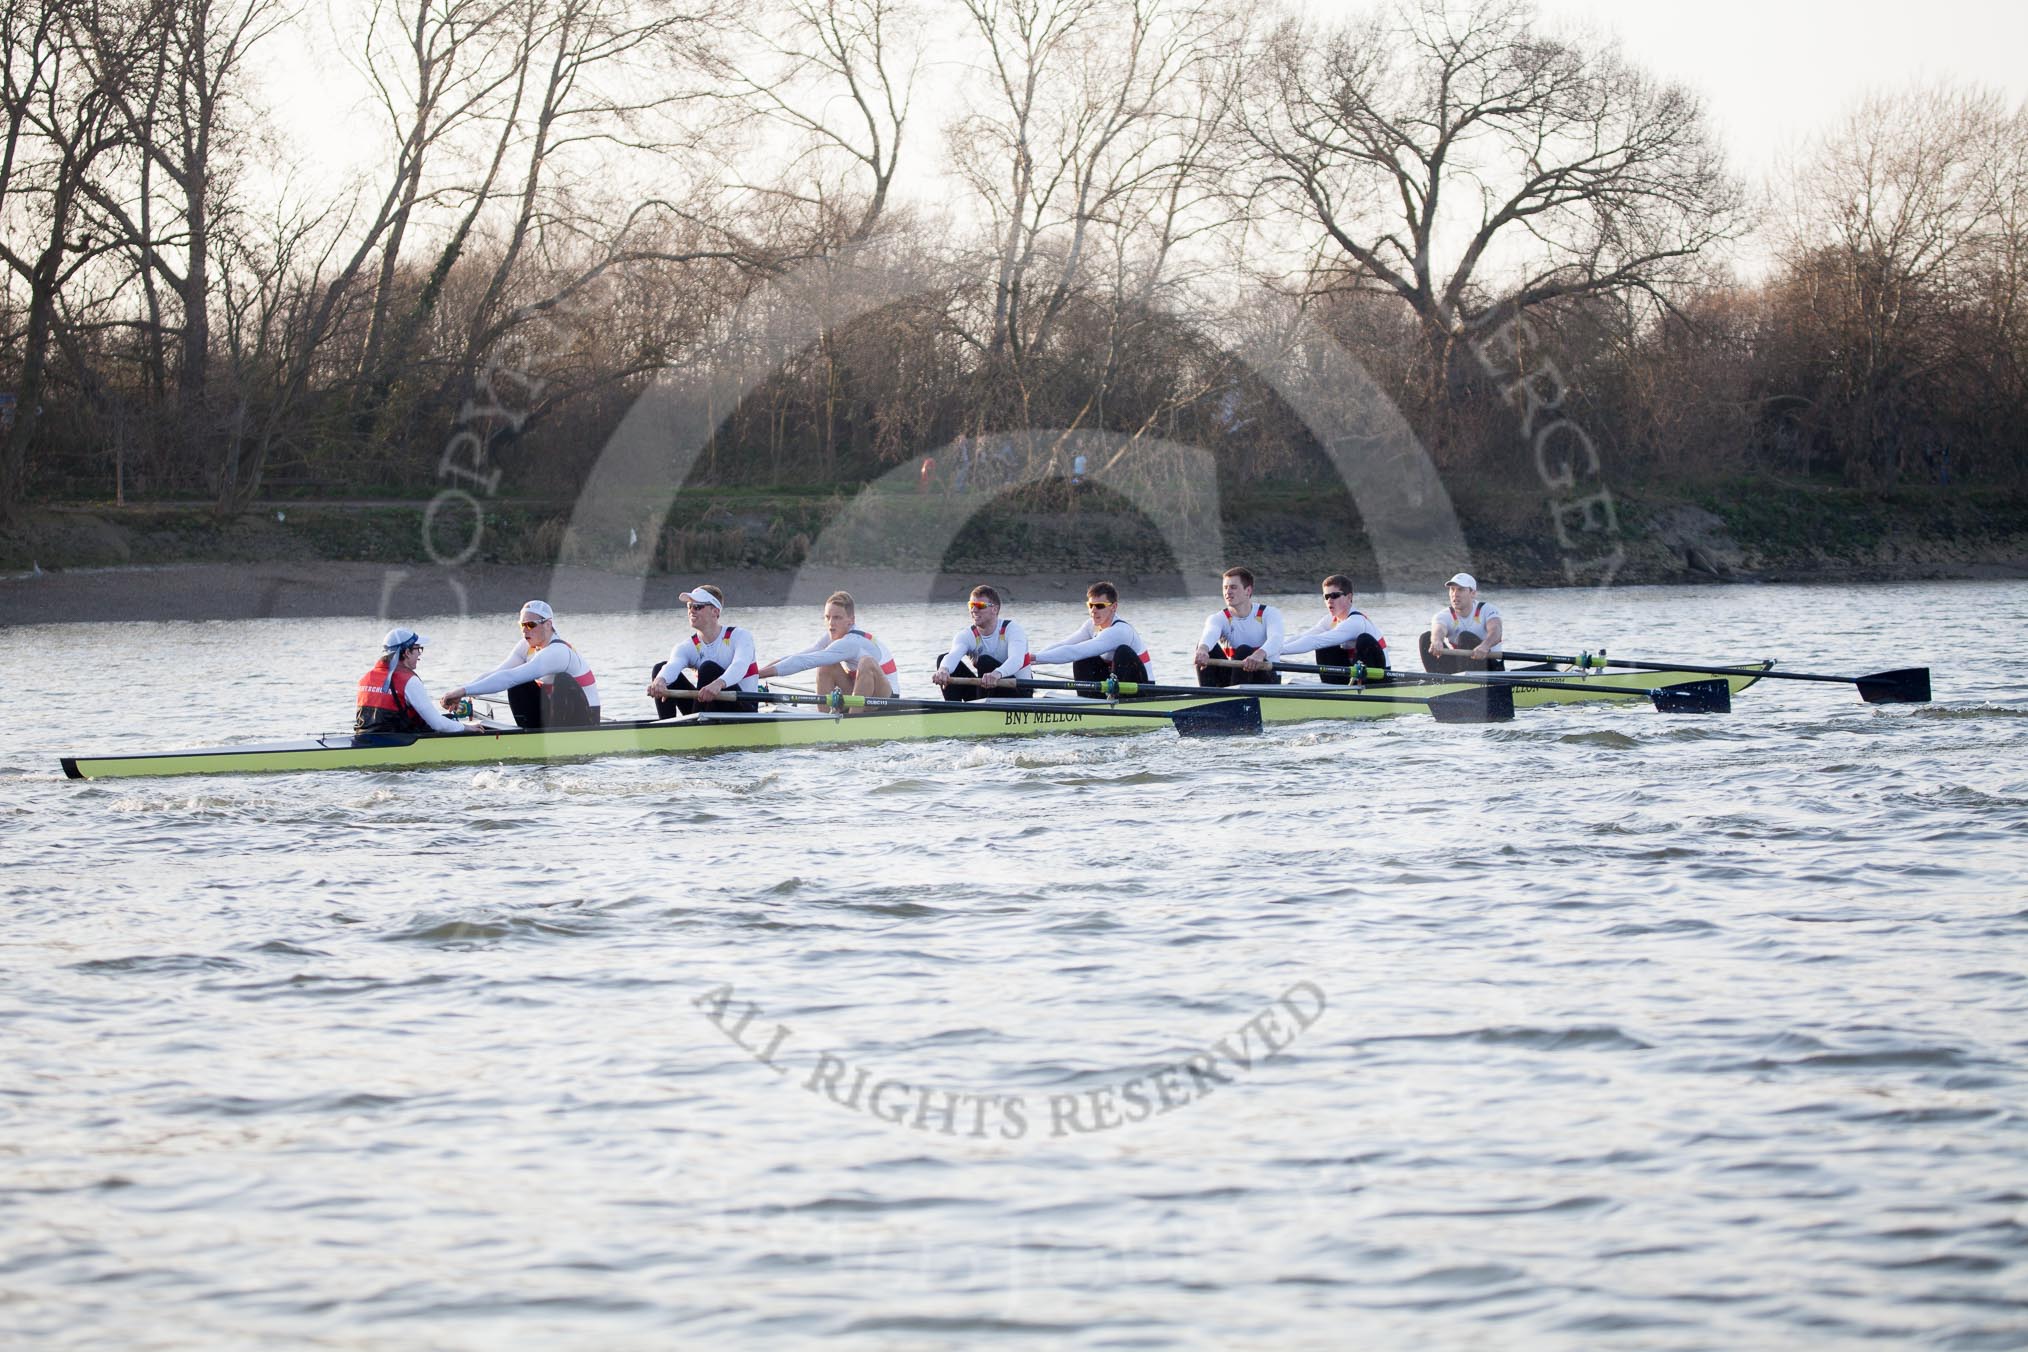 The Boat Race season 2014 - fixture OUBC vs German U23: The German U23-boat approaching the Mile Post..
River Thames between Putney Bridge and Chiswick Bridge,



on 08 March 2014 at 16:49, image #91